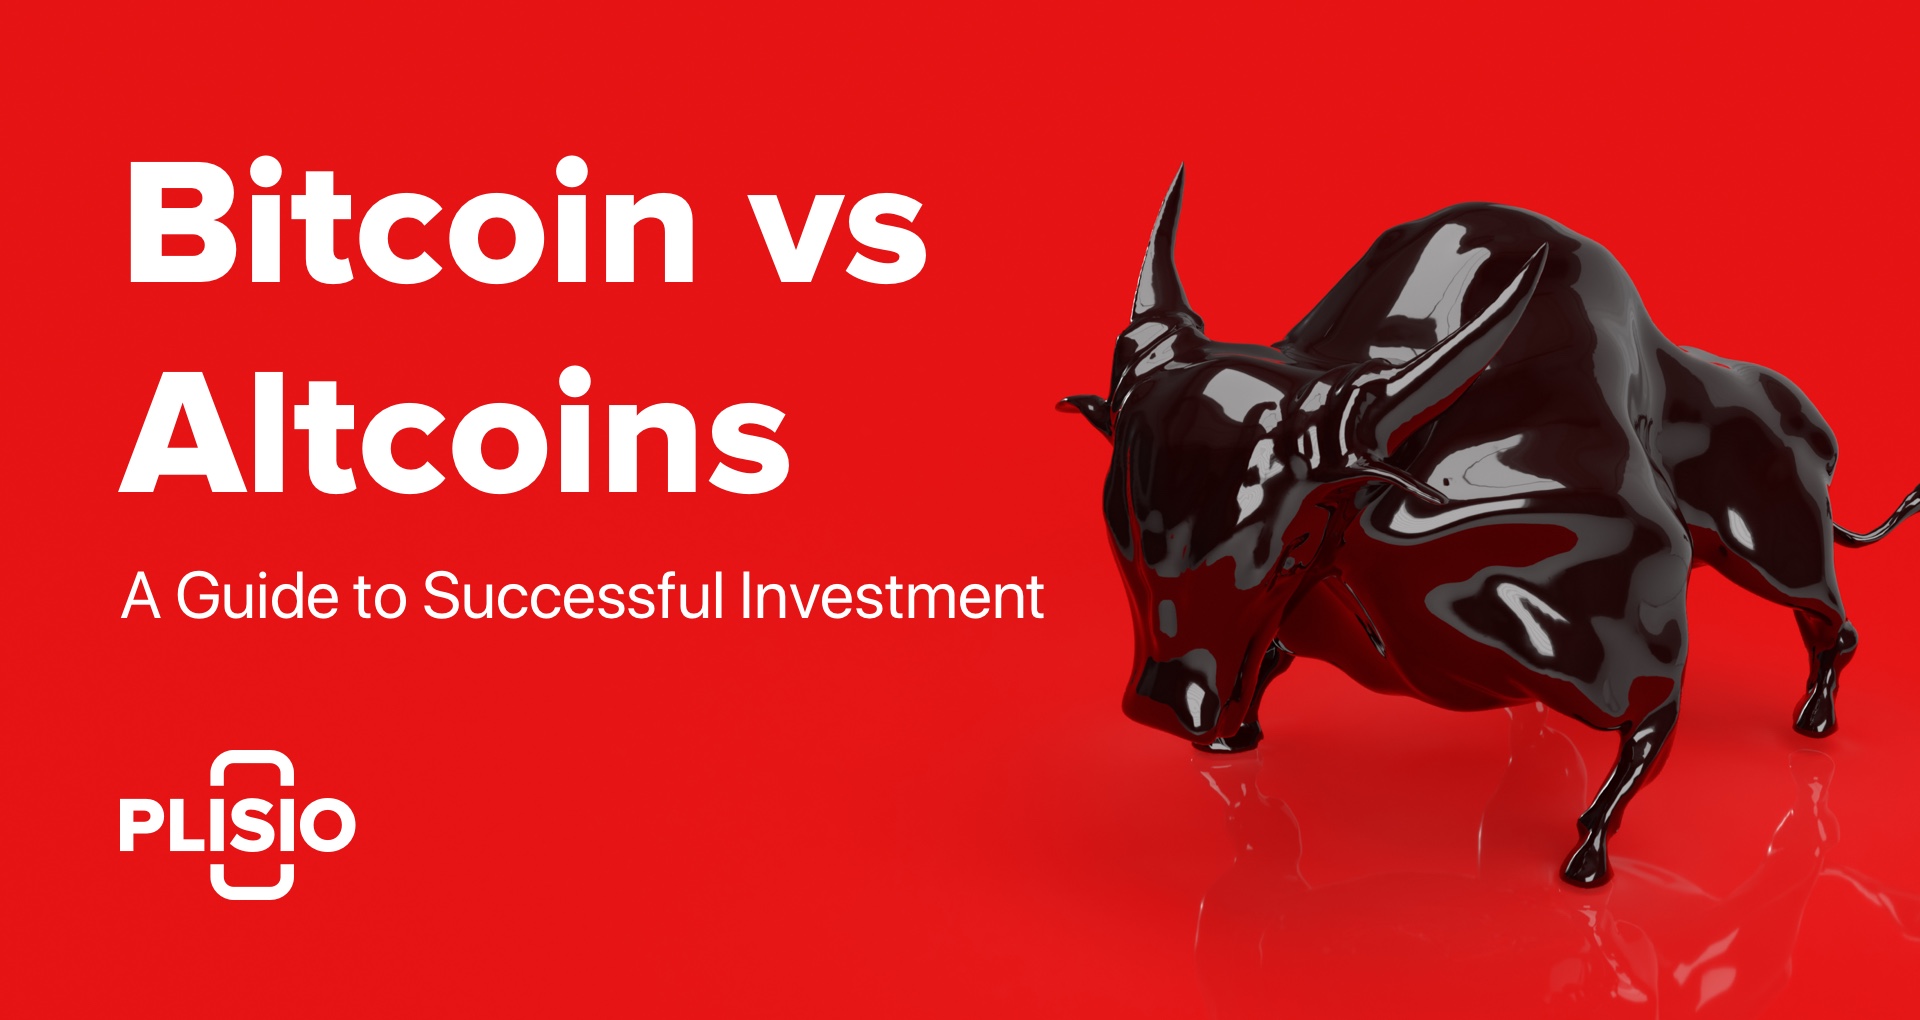 Bitcoin vs Altcoins. A Guide to Successful Investment